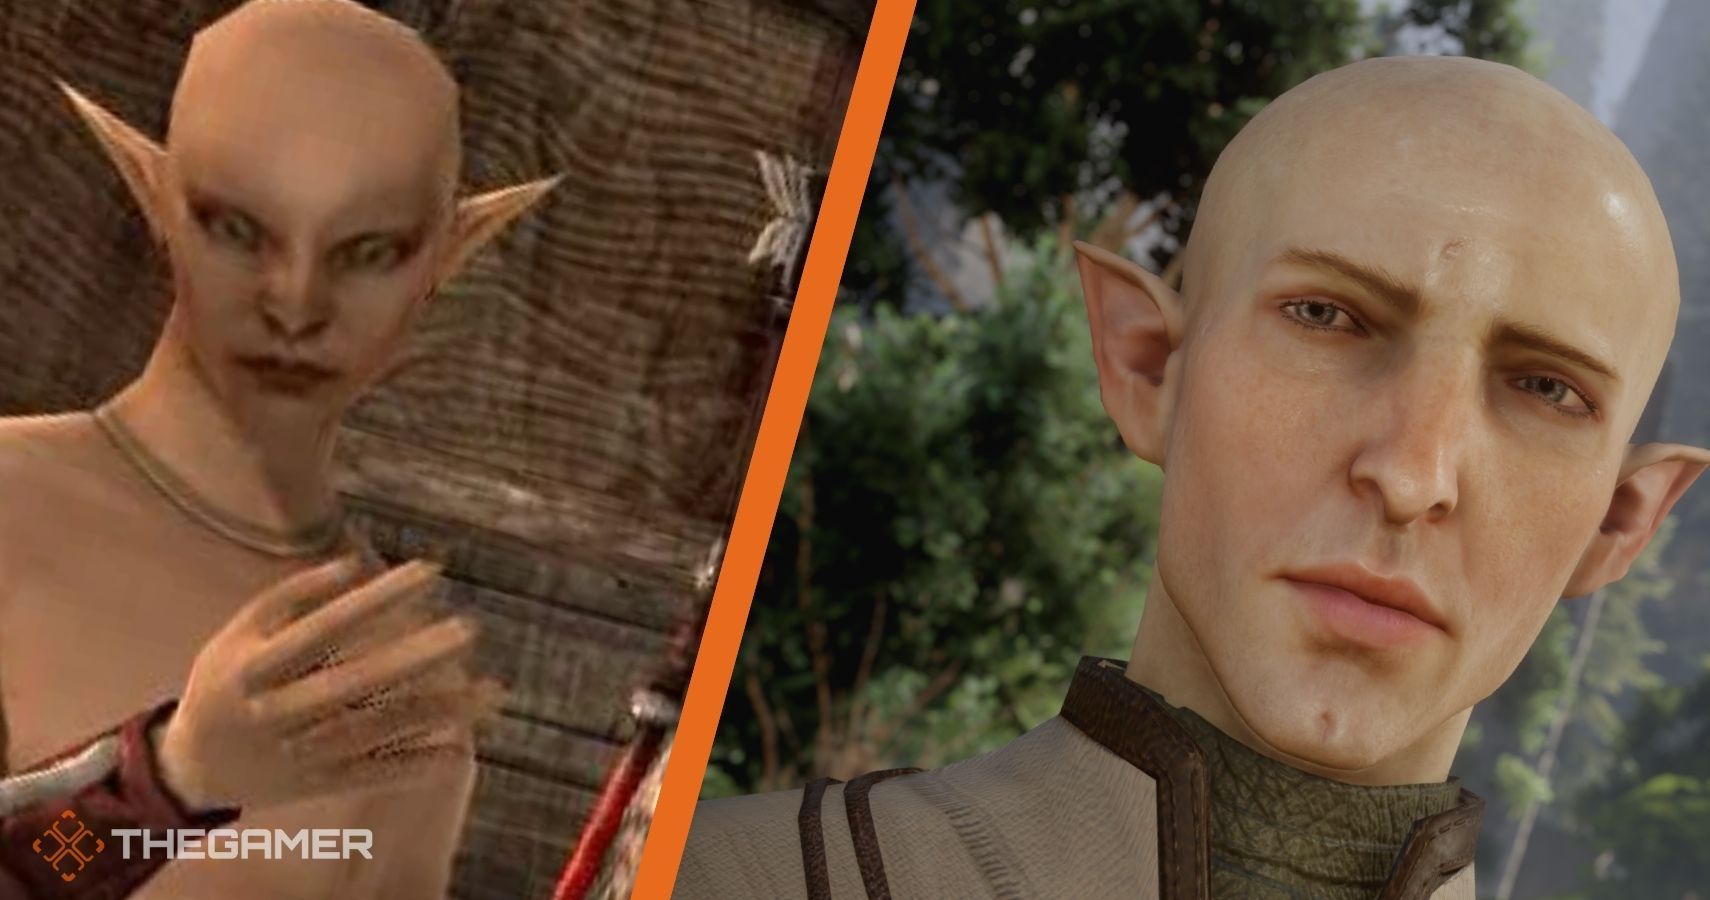 On the left there's a low resolution NPC elf. On the right, there's an HD character model for the elf, Solas.